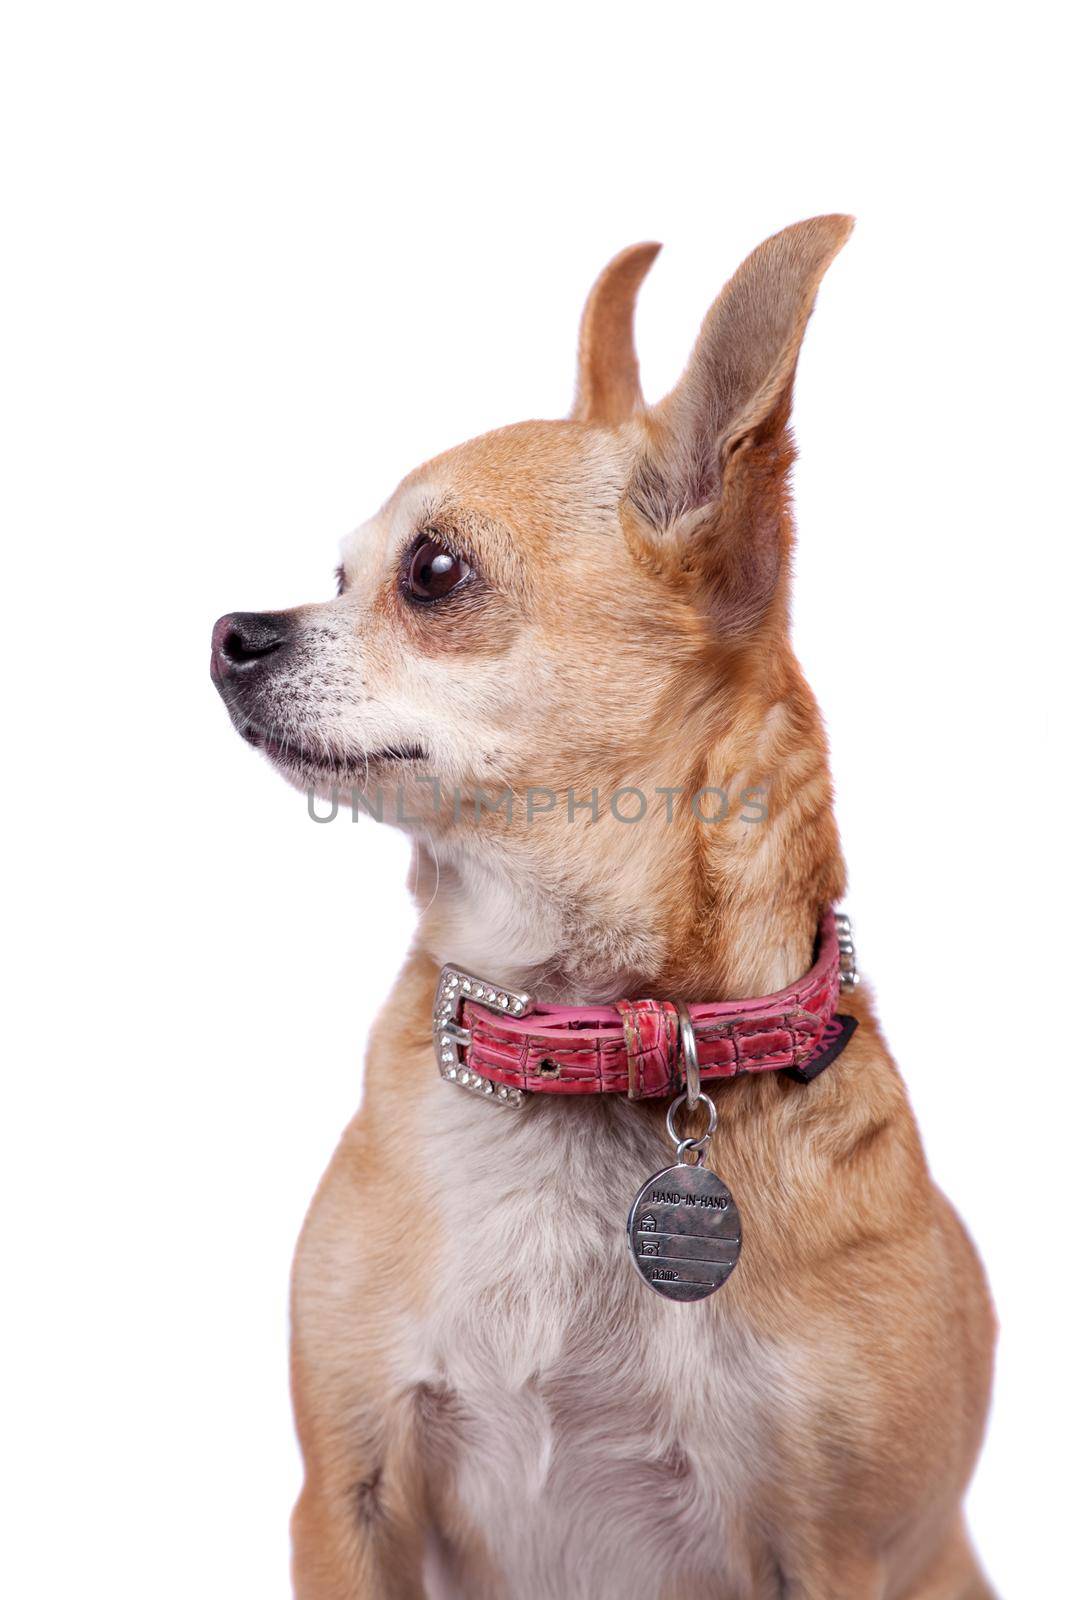 Chihuahua, 9 years old, on the white background by RosaJay